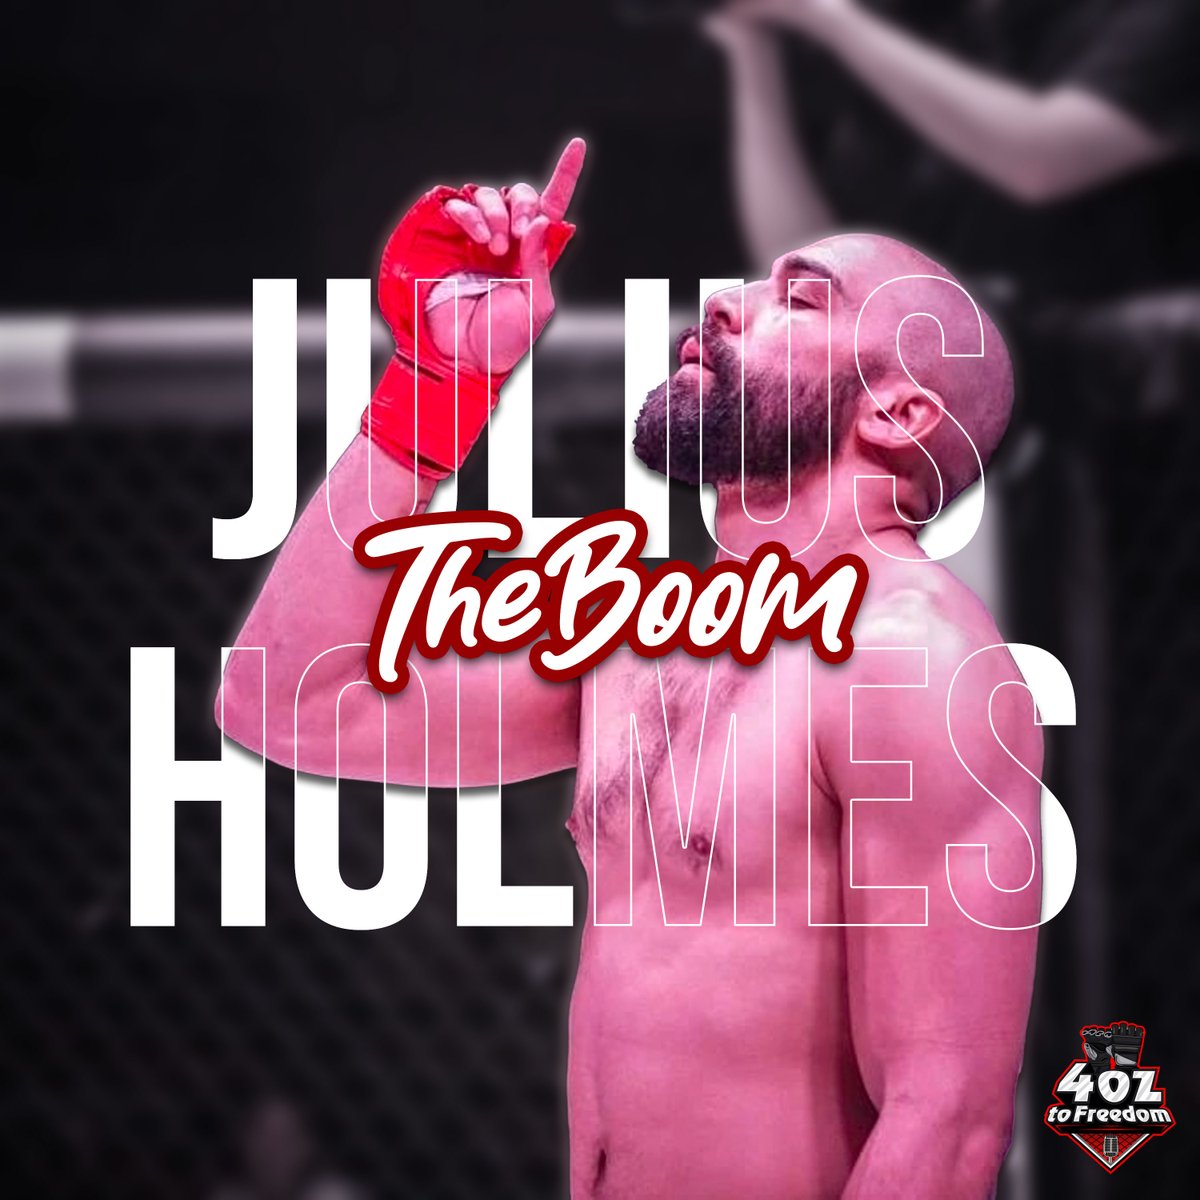 Julius 'The Boom' Holmes, joins me ahead of his Main Event bout against Aaron Phillips at #FuryFC86 on 2/23. We discuss the fight, anticipating a DWCS/UFC call with a win, and more!

Watch the interview now youtu.be/_ABKXZrhFyA or listen via your favorite podcast app.